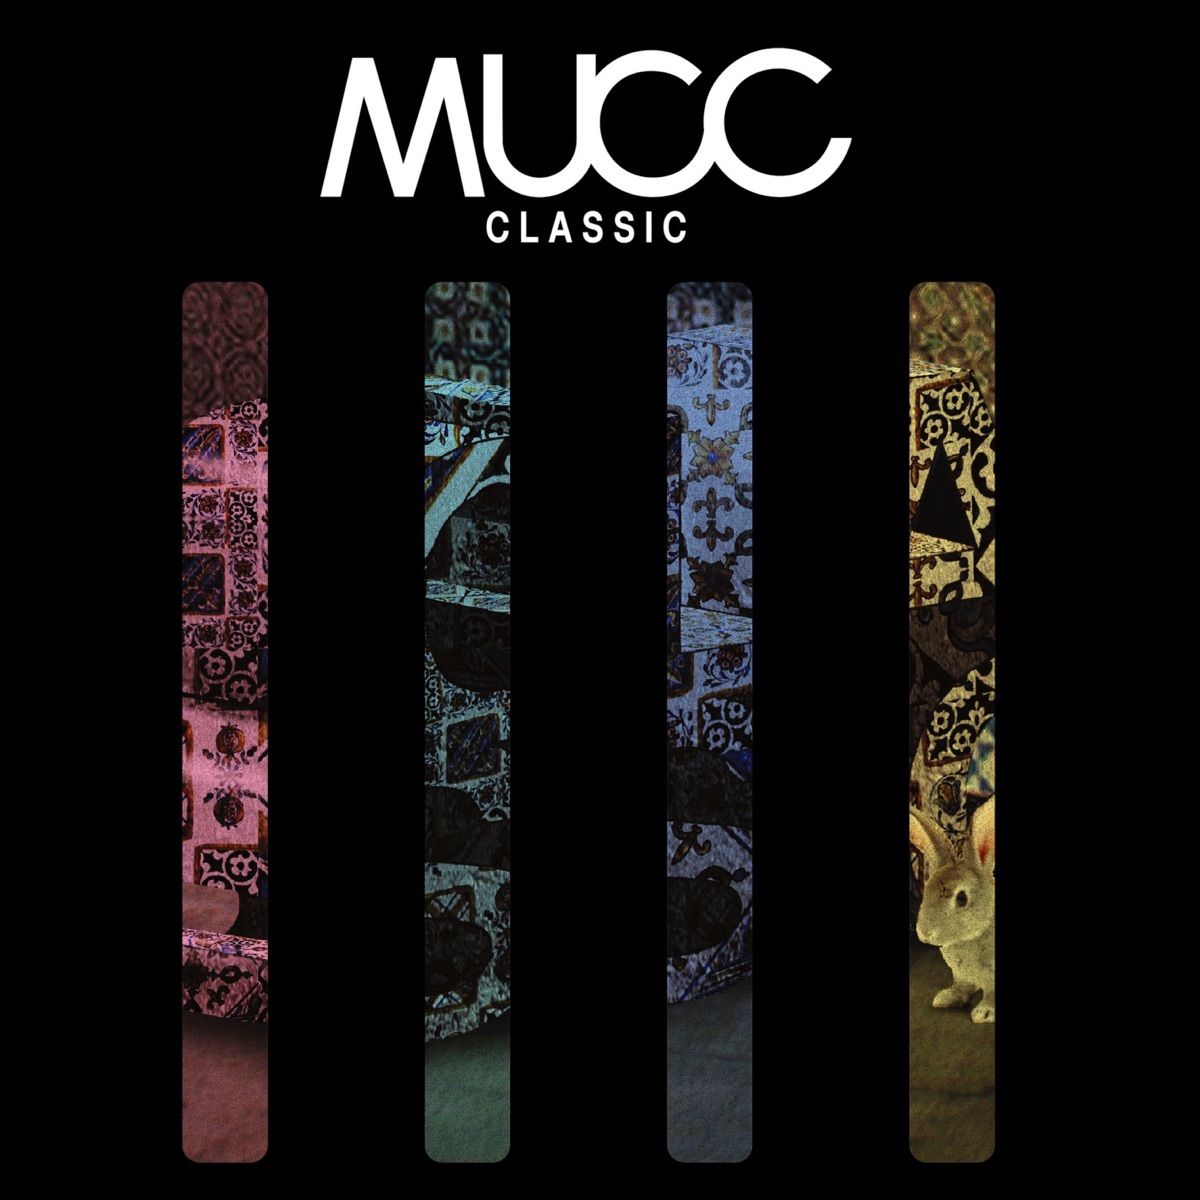 Cover art for『MUCC - CLASSIC』from the release『CLASSIC』